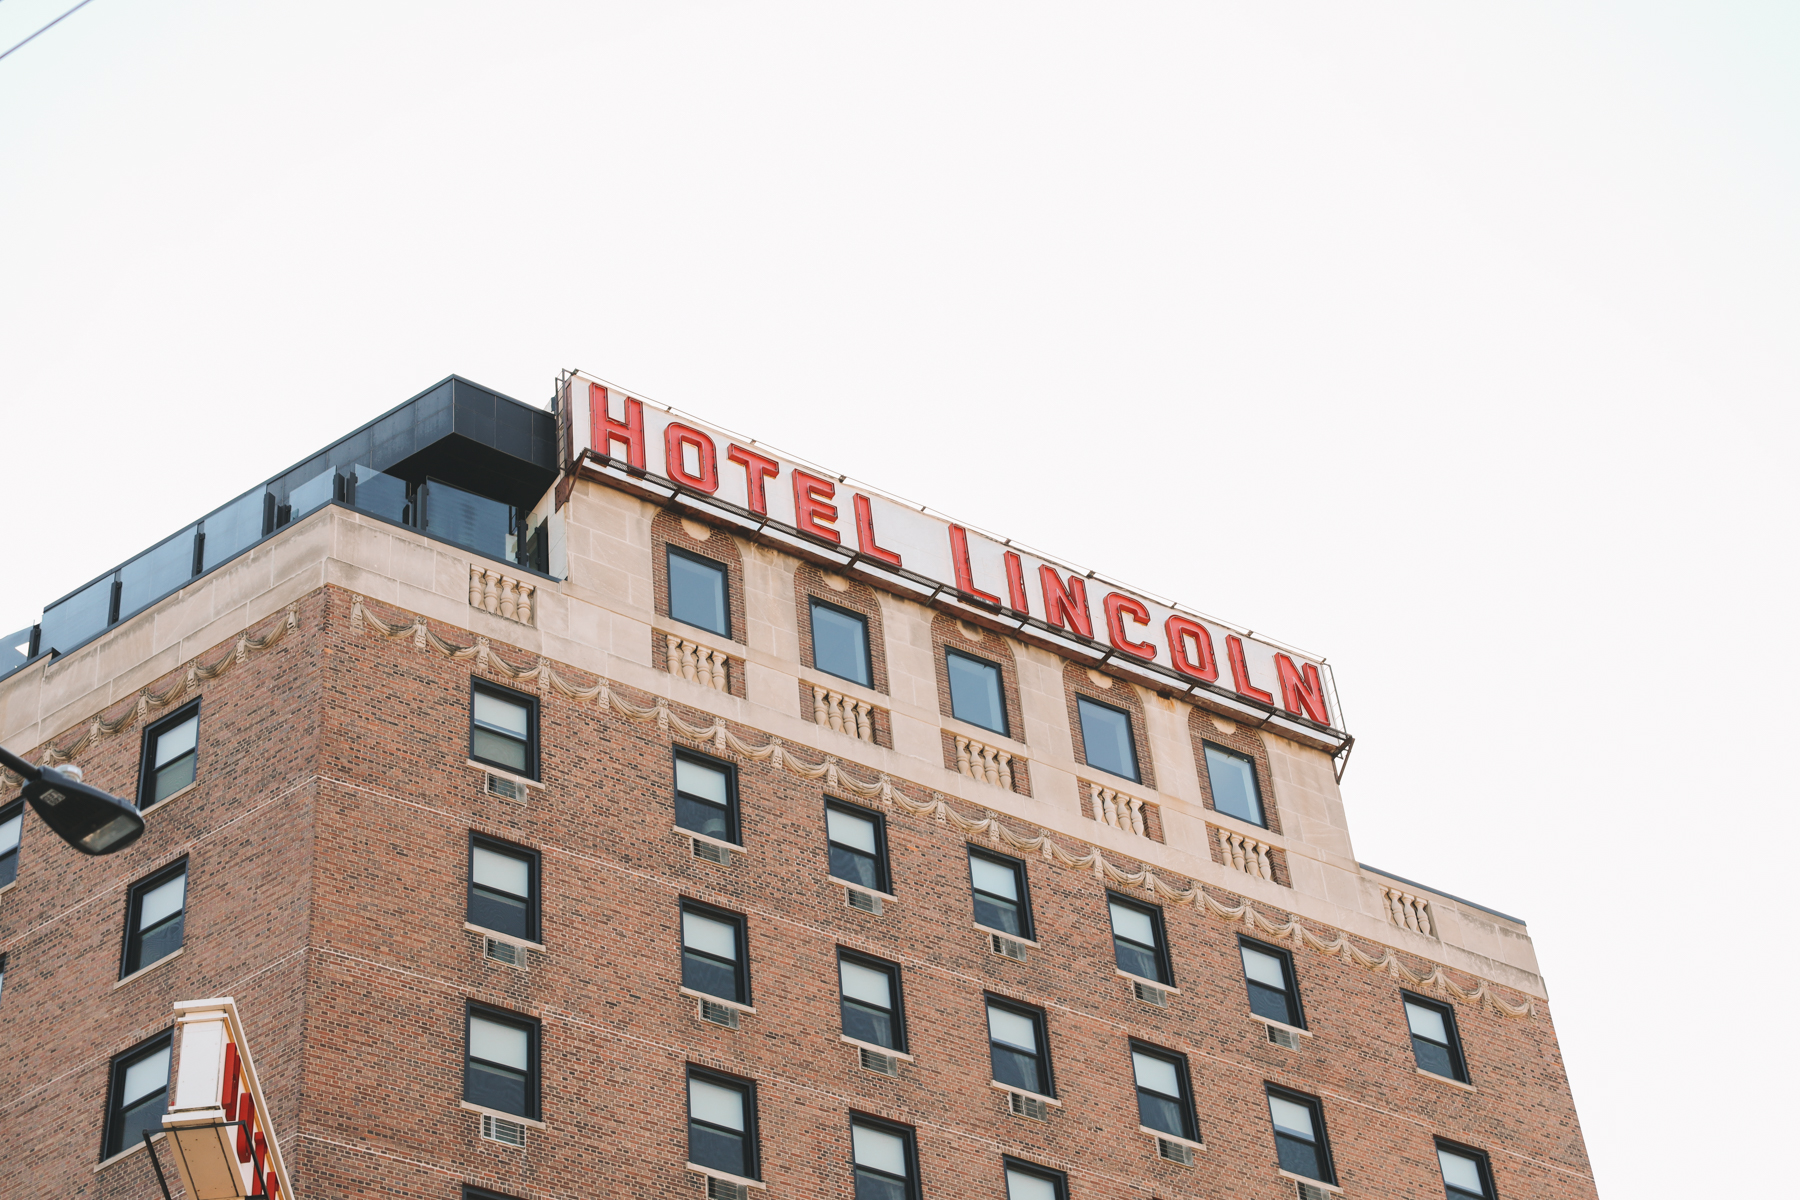 Hotel Lincoln signboard